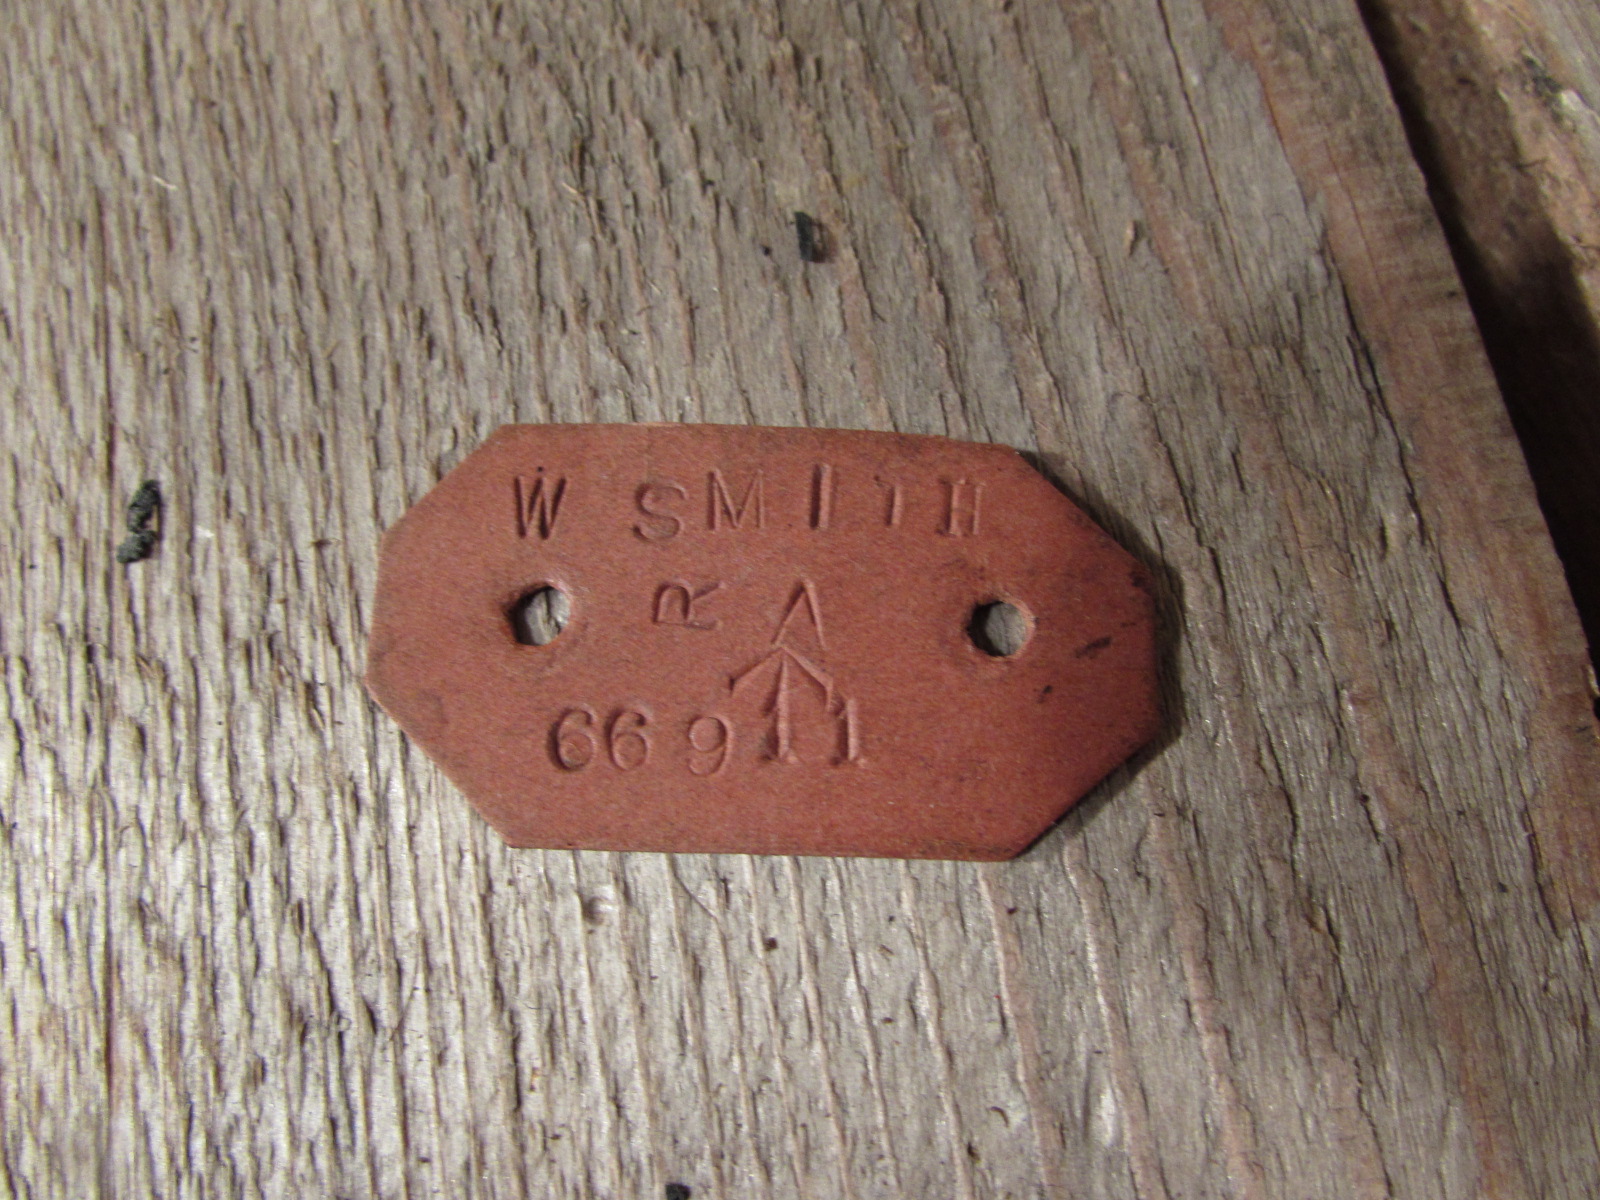 Grave marking tag, WWII